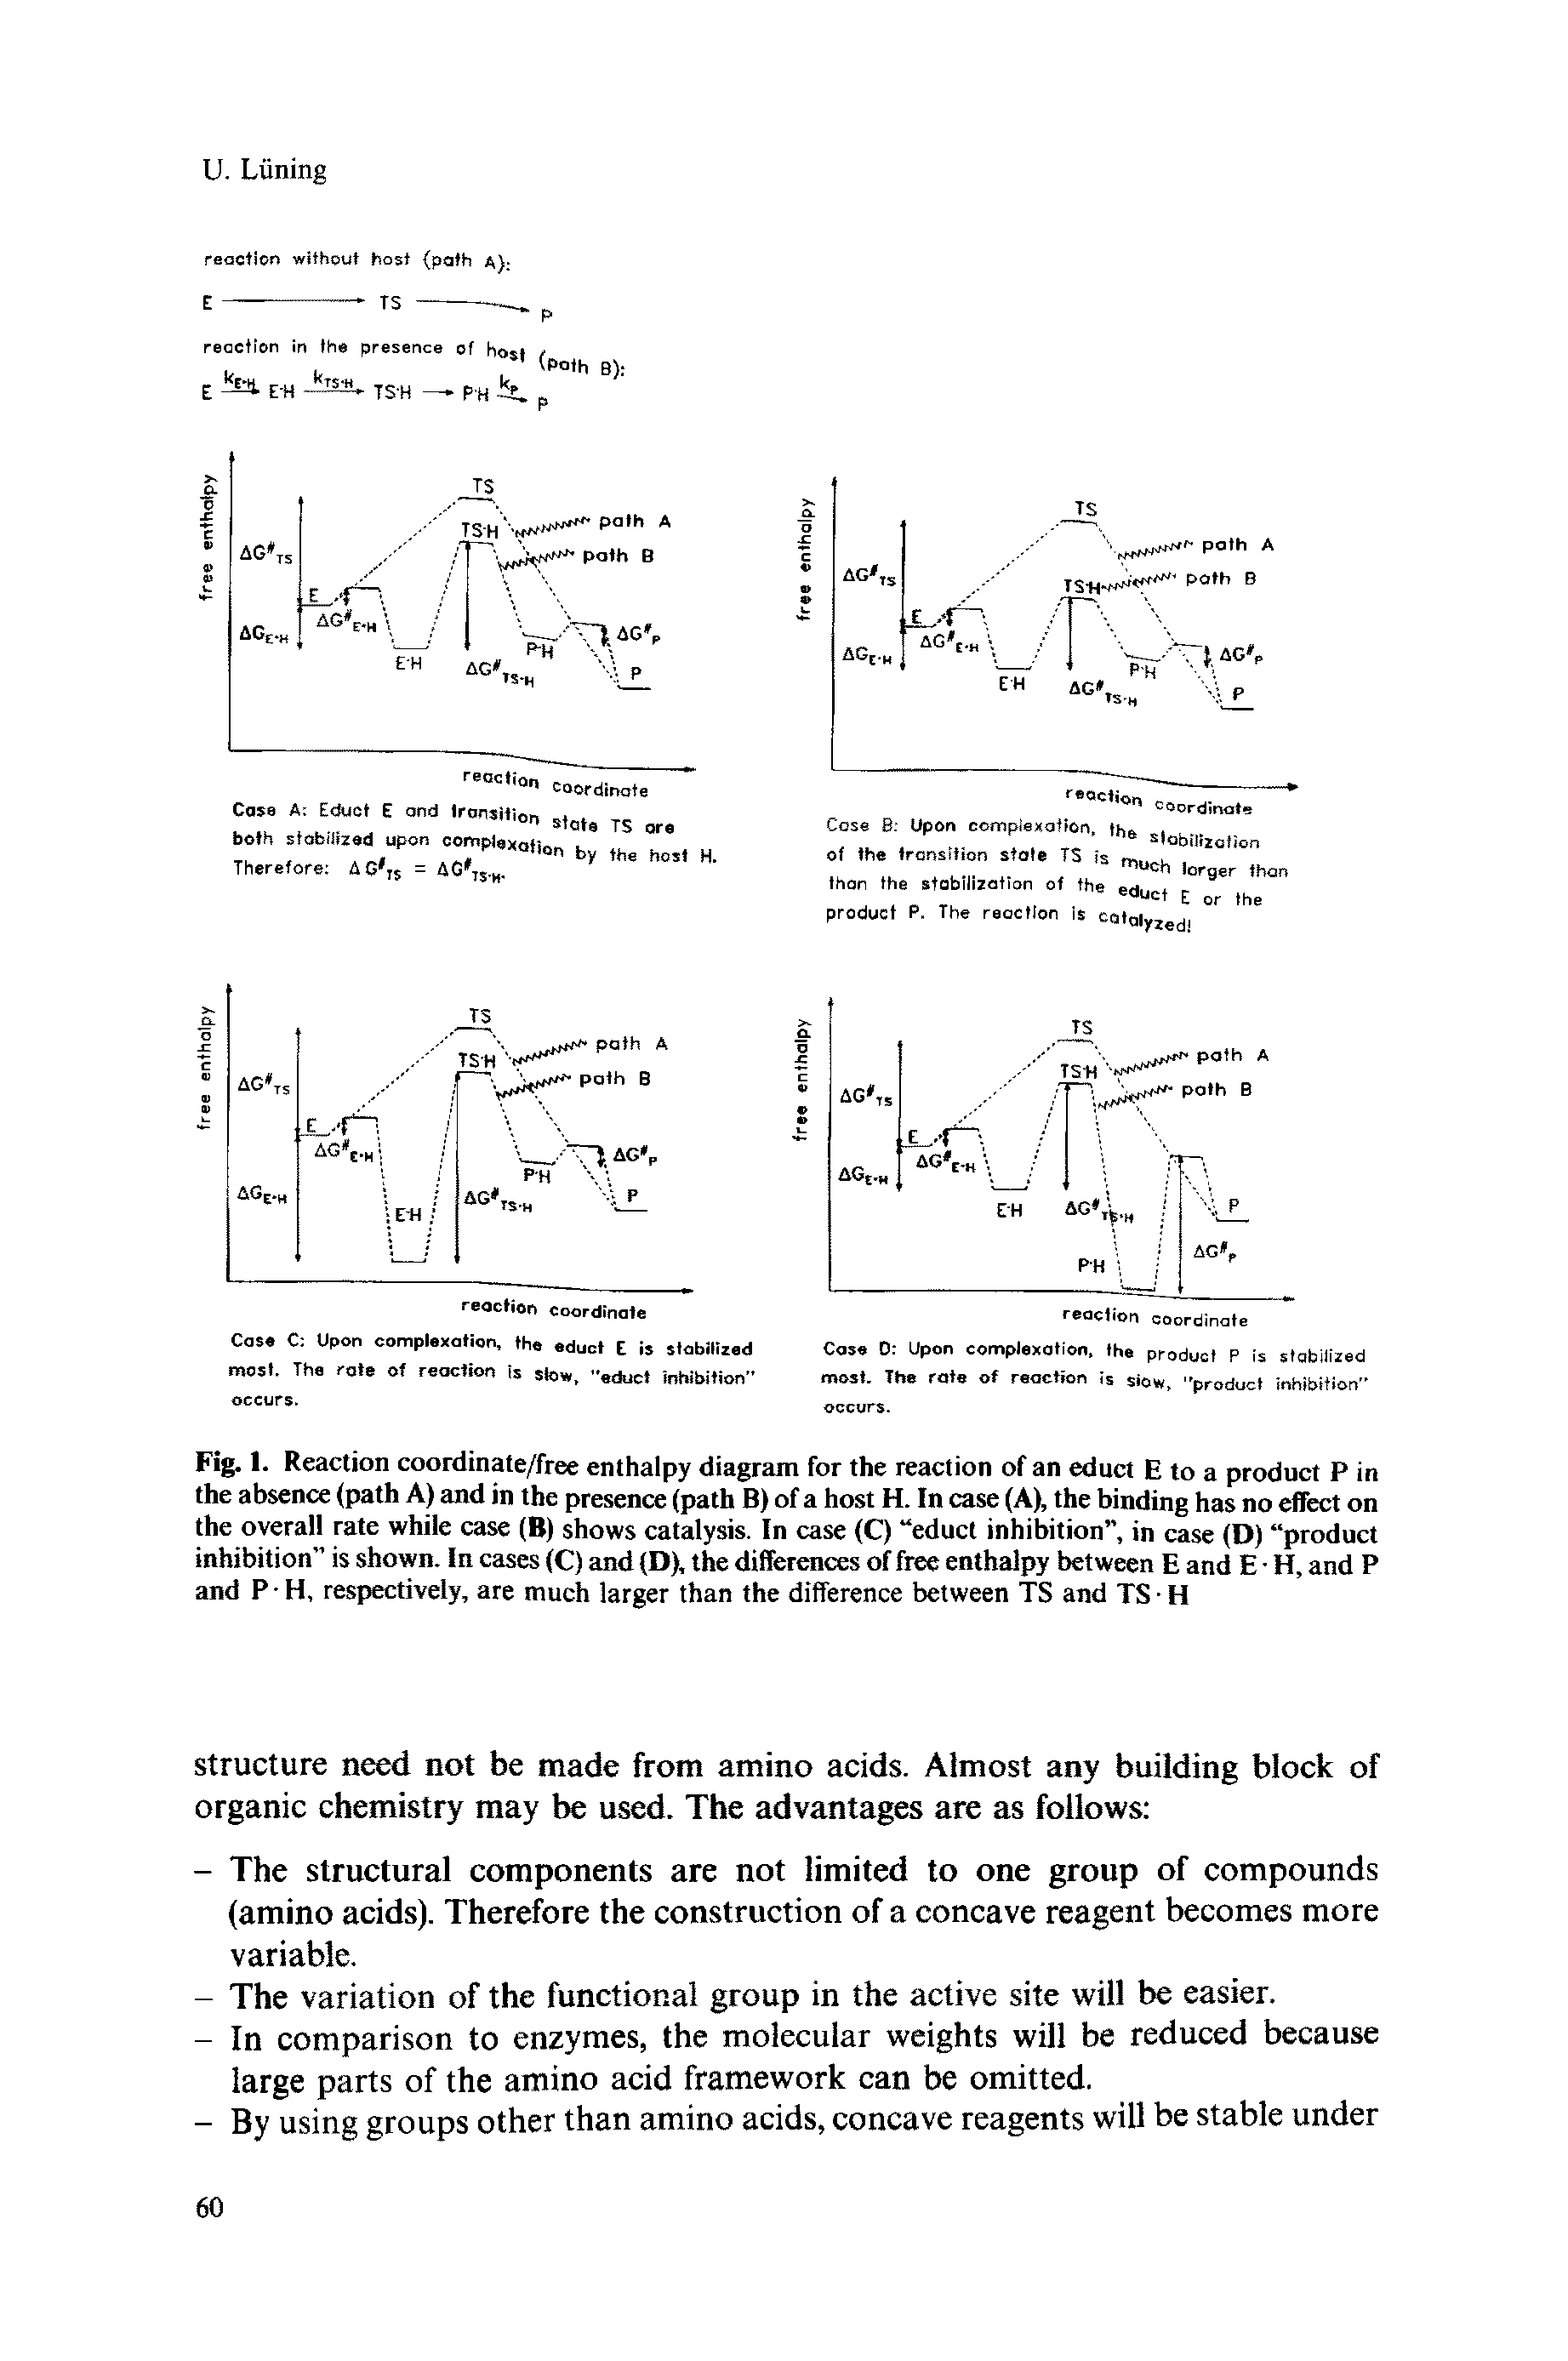 Fig. I. Reaction coordinate/free enthalpy diagram for the reaction of an educt E to a product P in the absence (path A) and in the presence (path B) of a host H. In case (A), the binding has no effect on the overall rate while case (B) shows catalysis. In case (C) educt inhibition , in case (D) product inhibition is shown. In cases (C) and (D), the differences of free enthalpy between E and E H, and P and P H, respectively, are much larger than the difference between TS and TS-H...